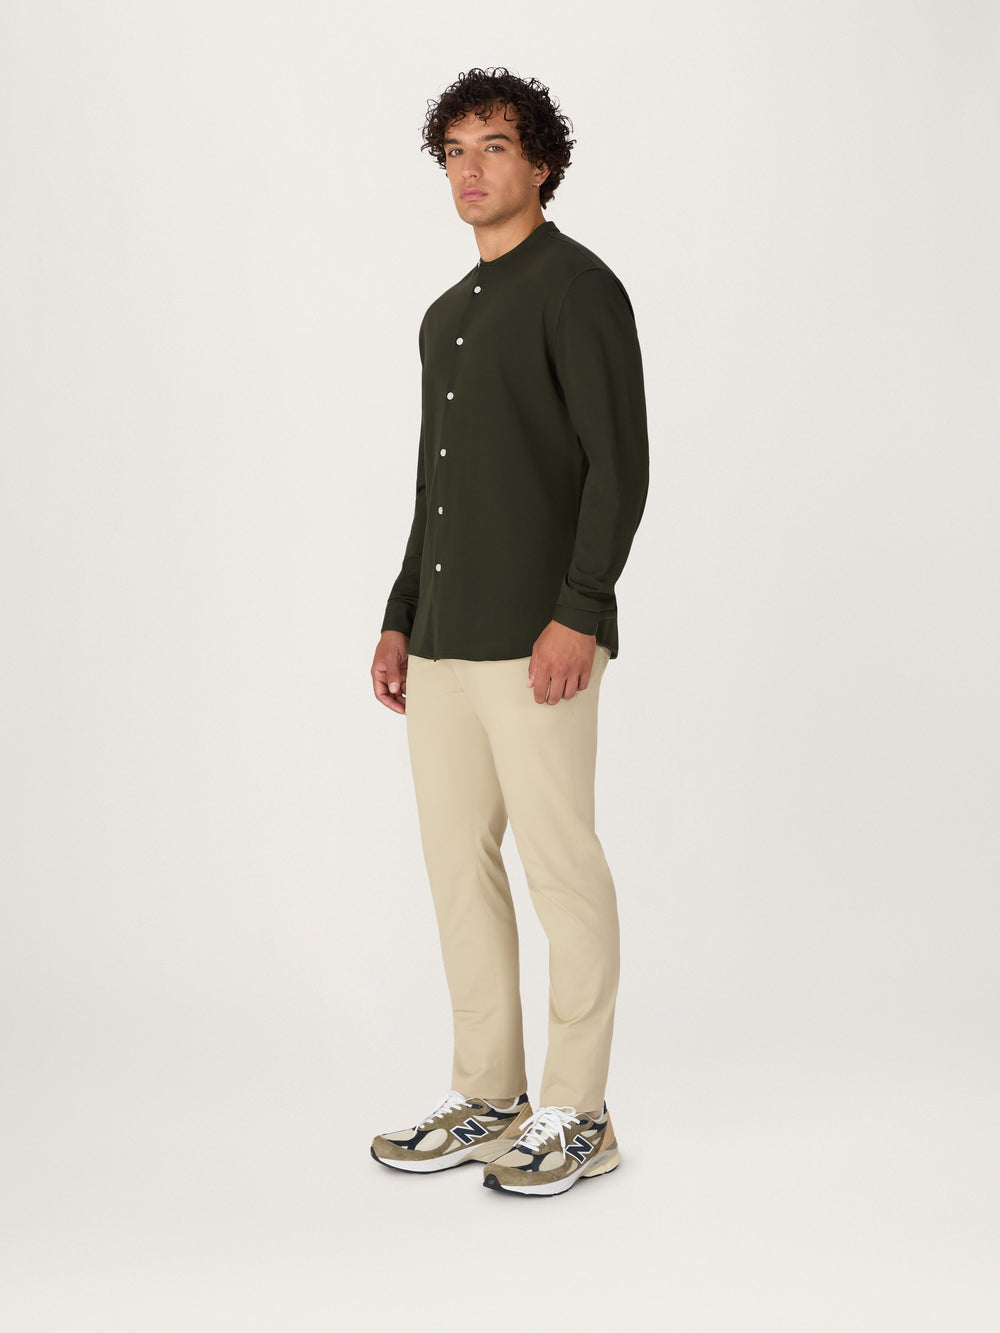 The All Day Shirt Jersey || Dark Olive